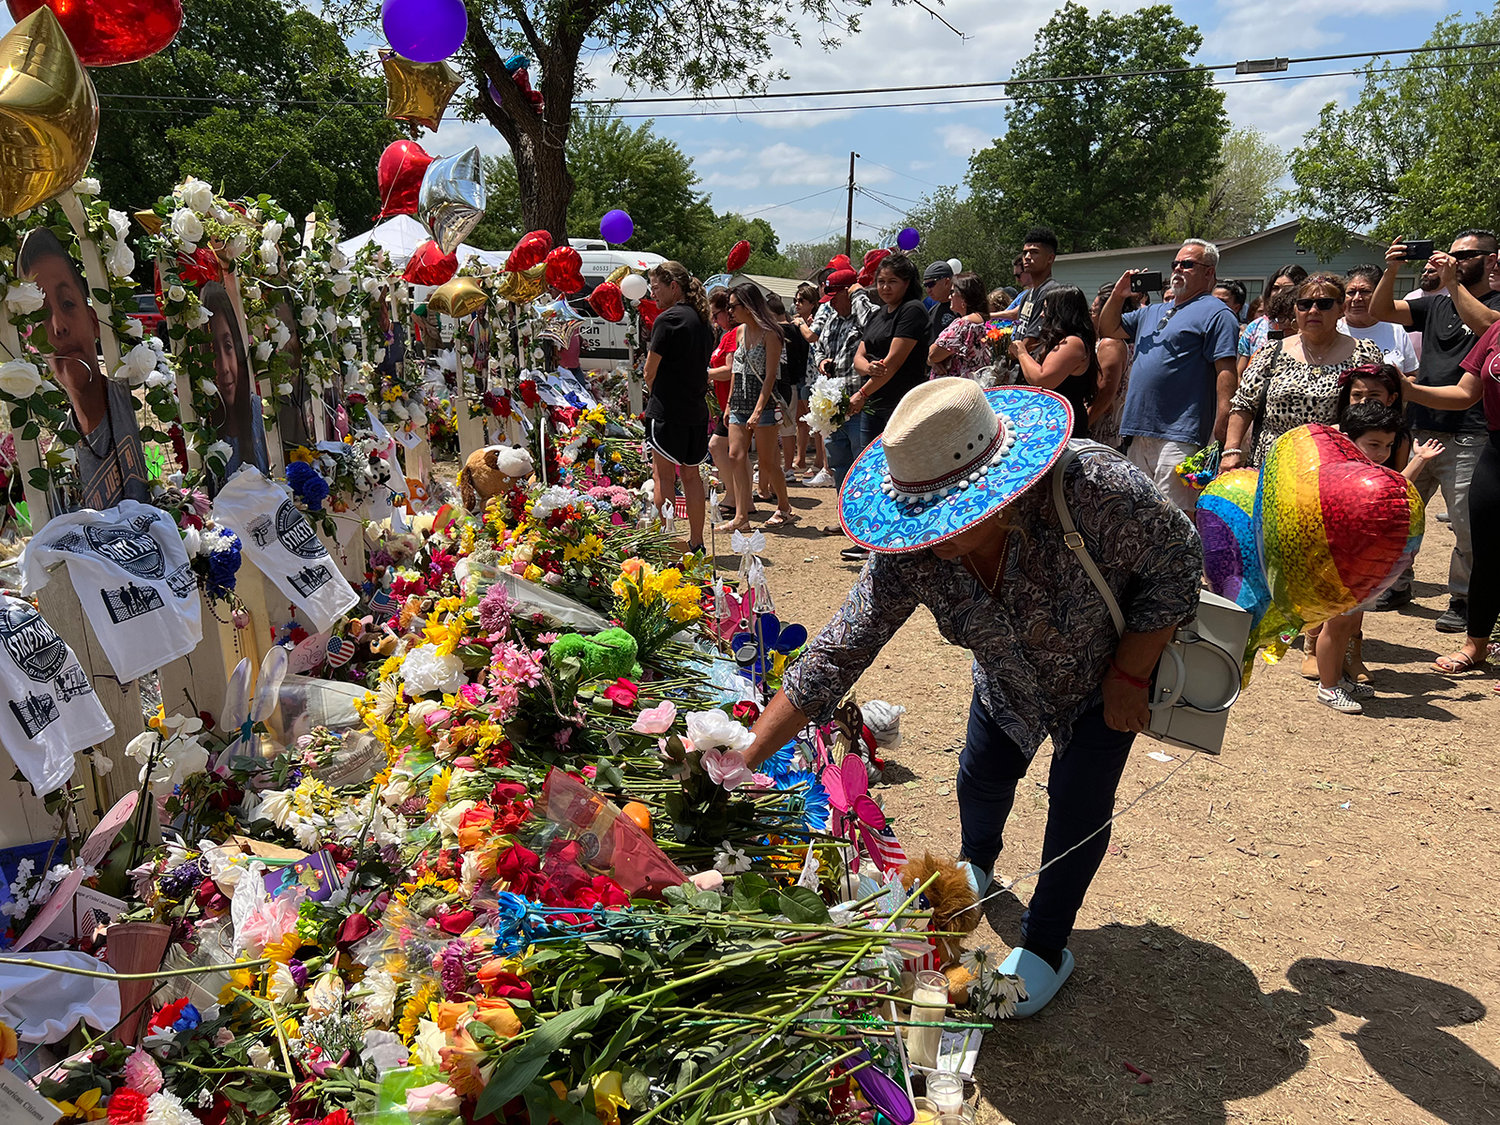 Visitors lay flowers at a memorial outside Robb Elementary School in Uvalde, Texas, where 19 children and two teachers were killed in a mass shooting. (Molly Hennessy-Fiske/Los Angeles Times/TNS)